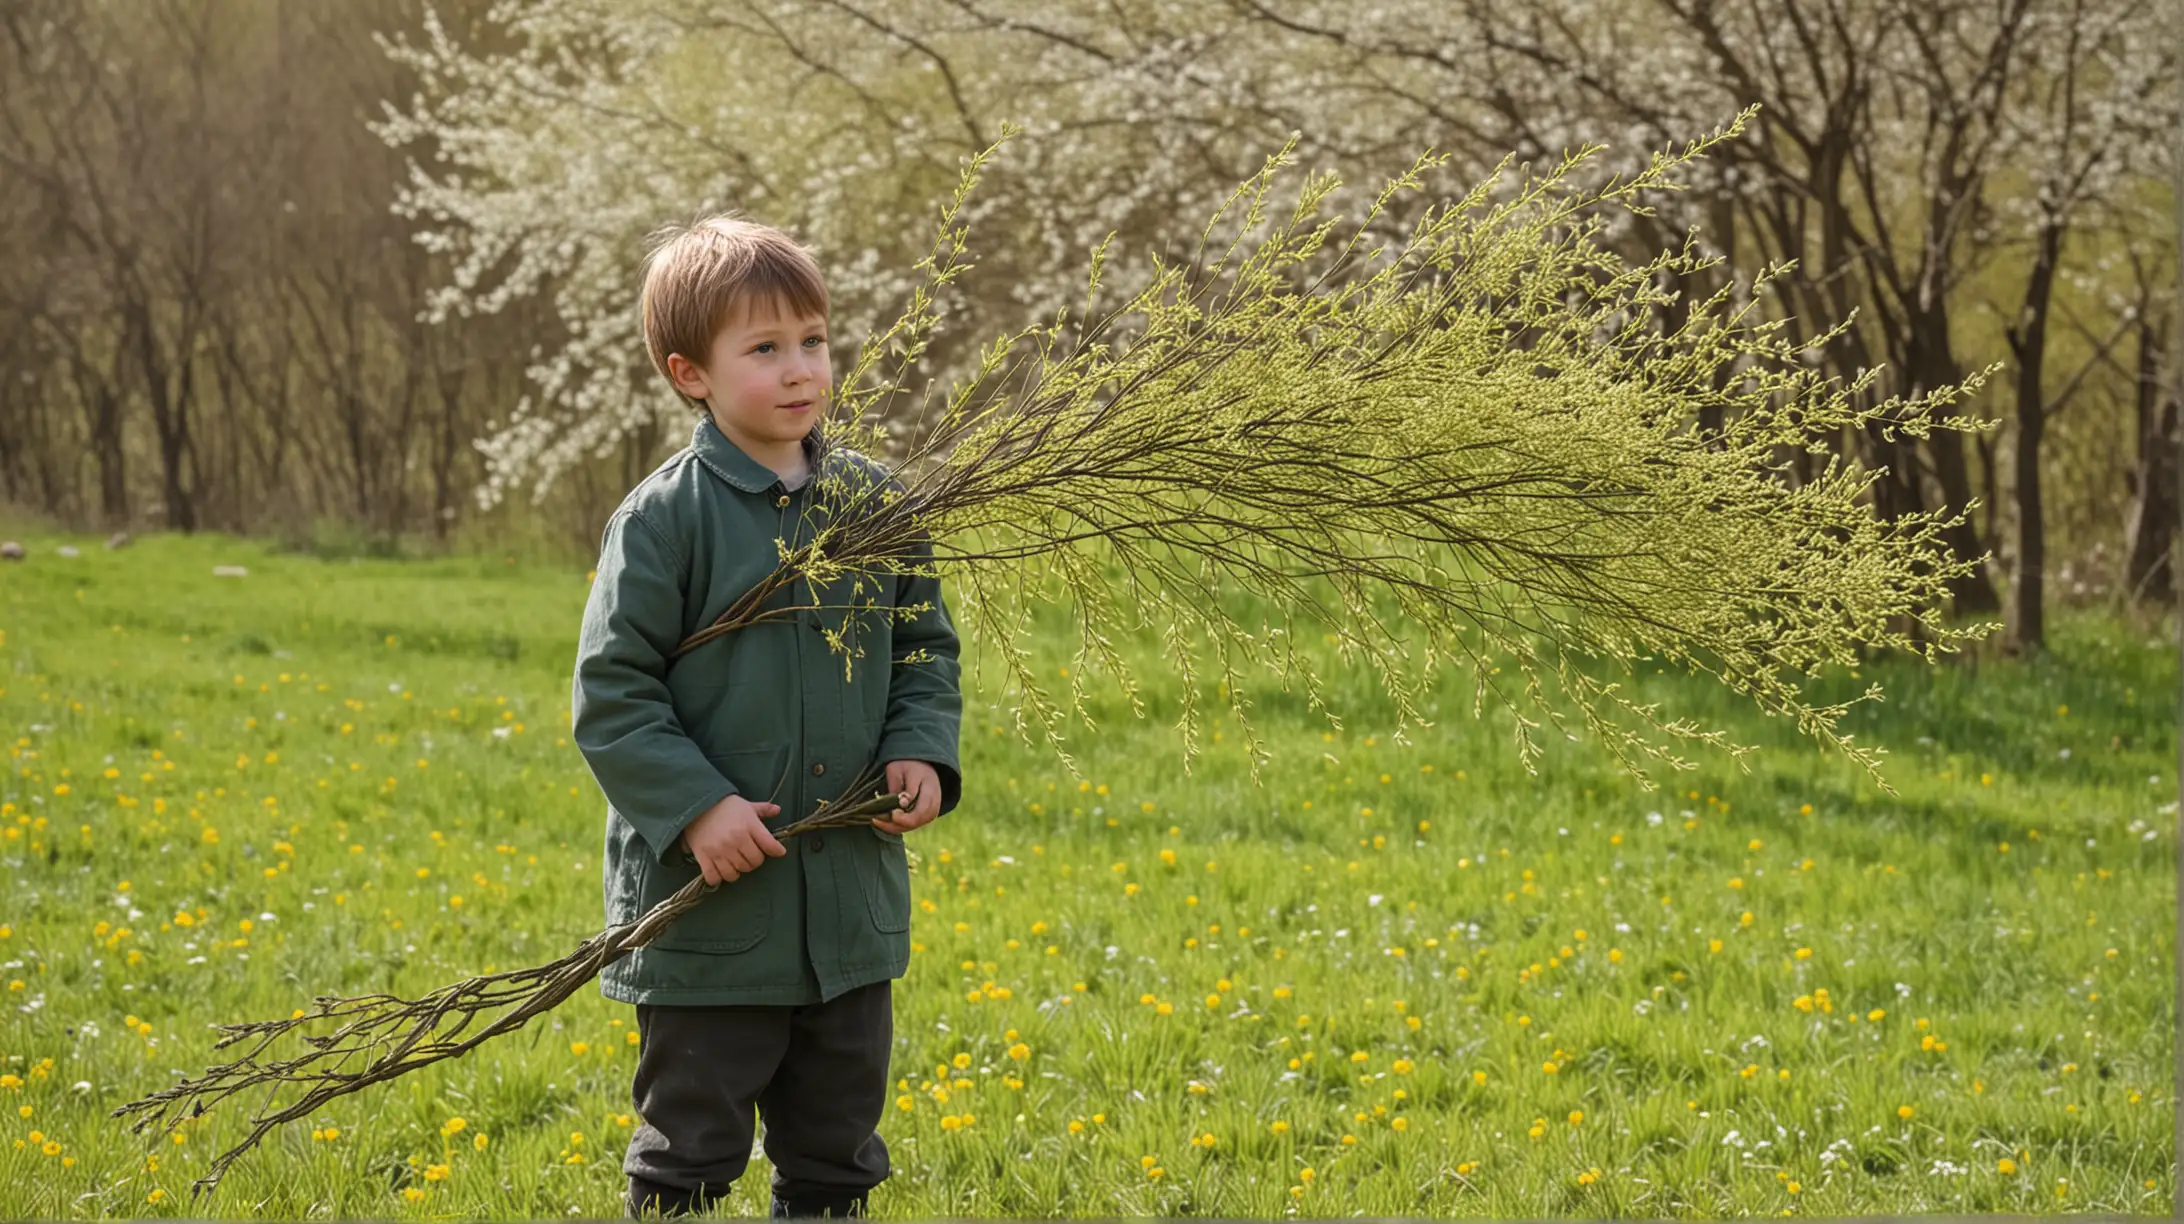 Young Boy Playing Near Willow Tree in Springtime